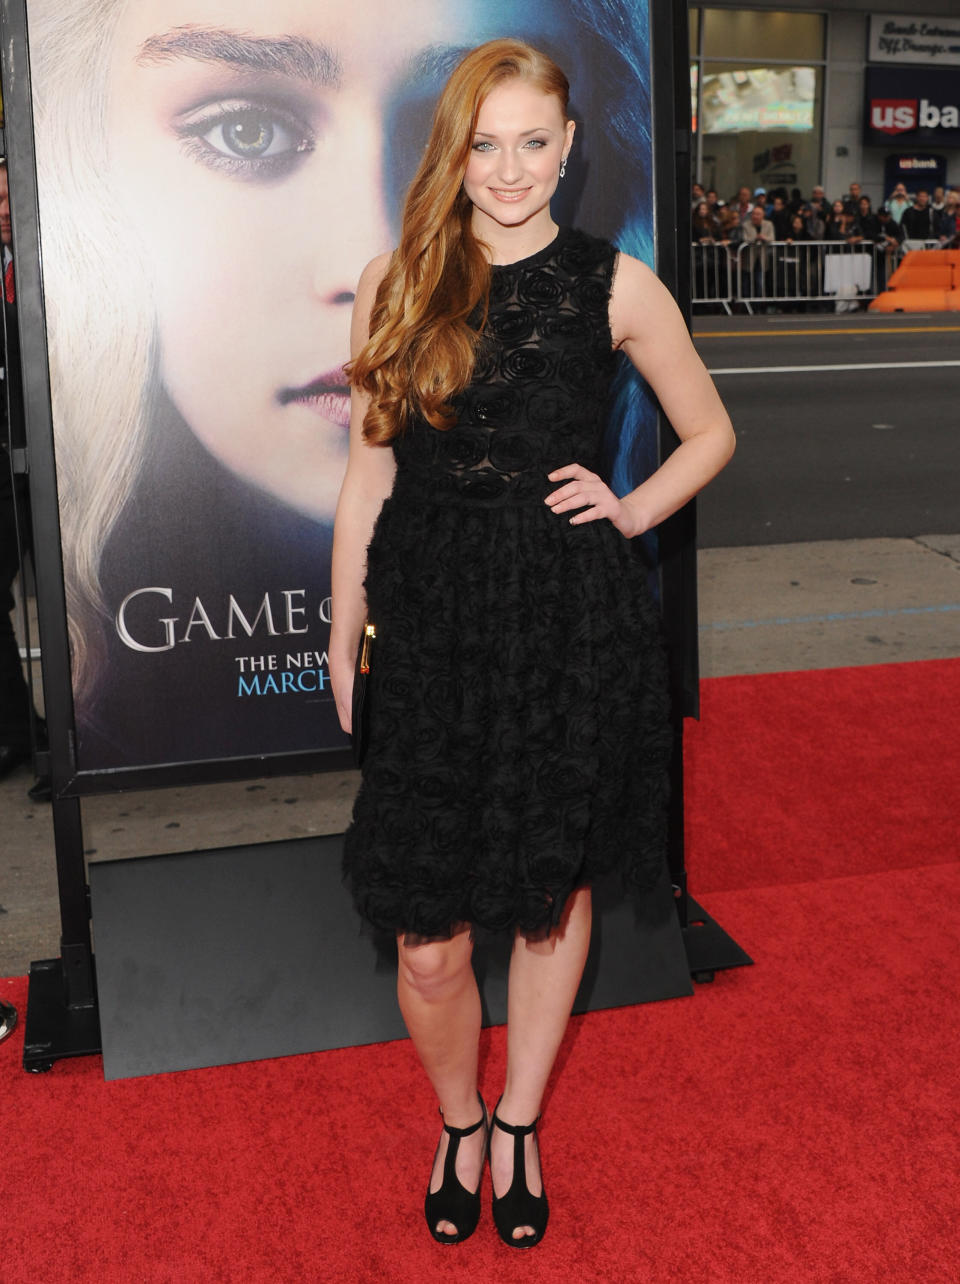 Turner attends the Los Angeles premiere of "Game of Thrones" Season 3 at the TCL Chinese Theater on March 18 in Hollywood.&nbsp;